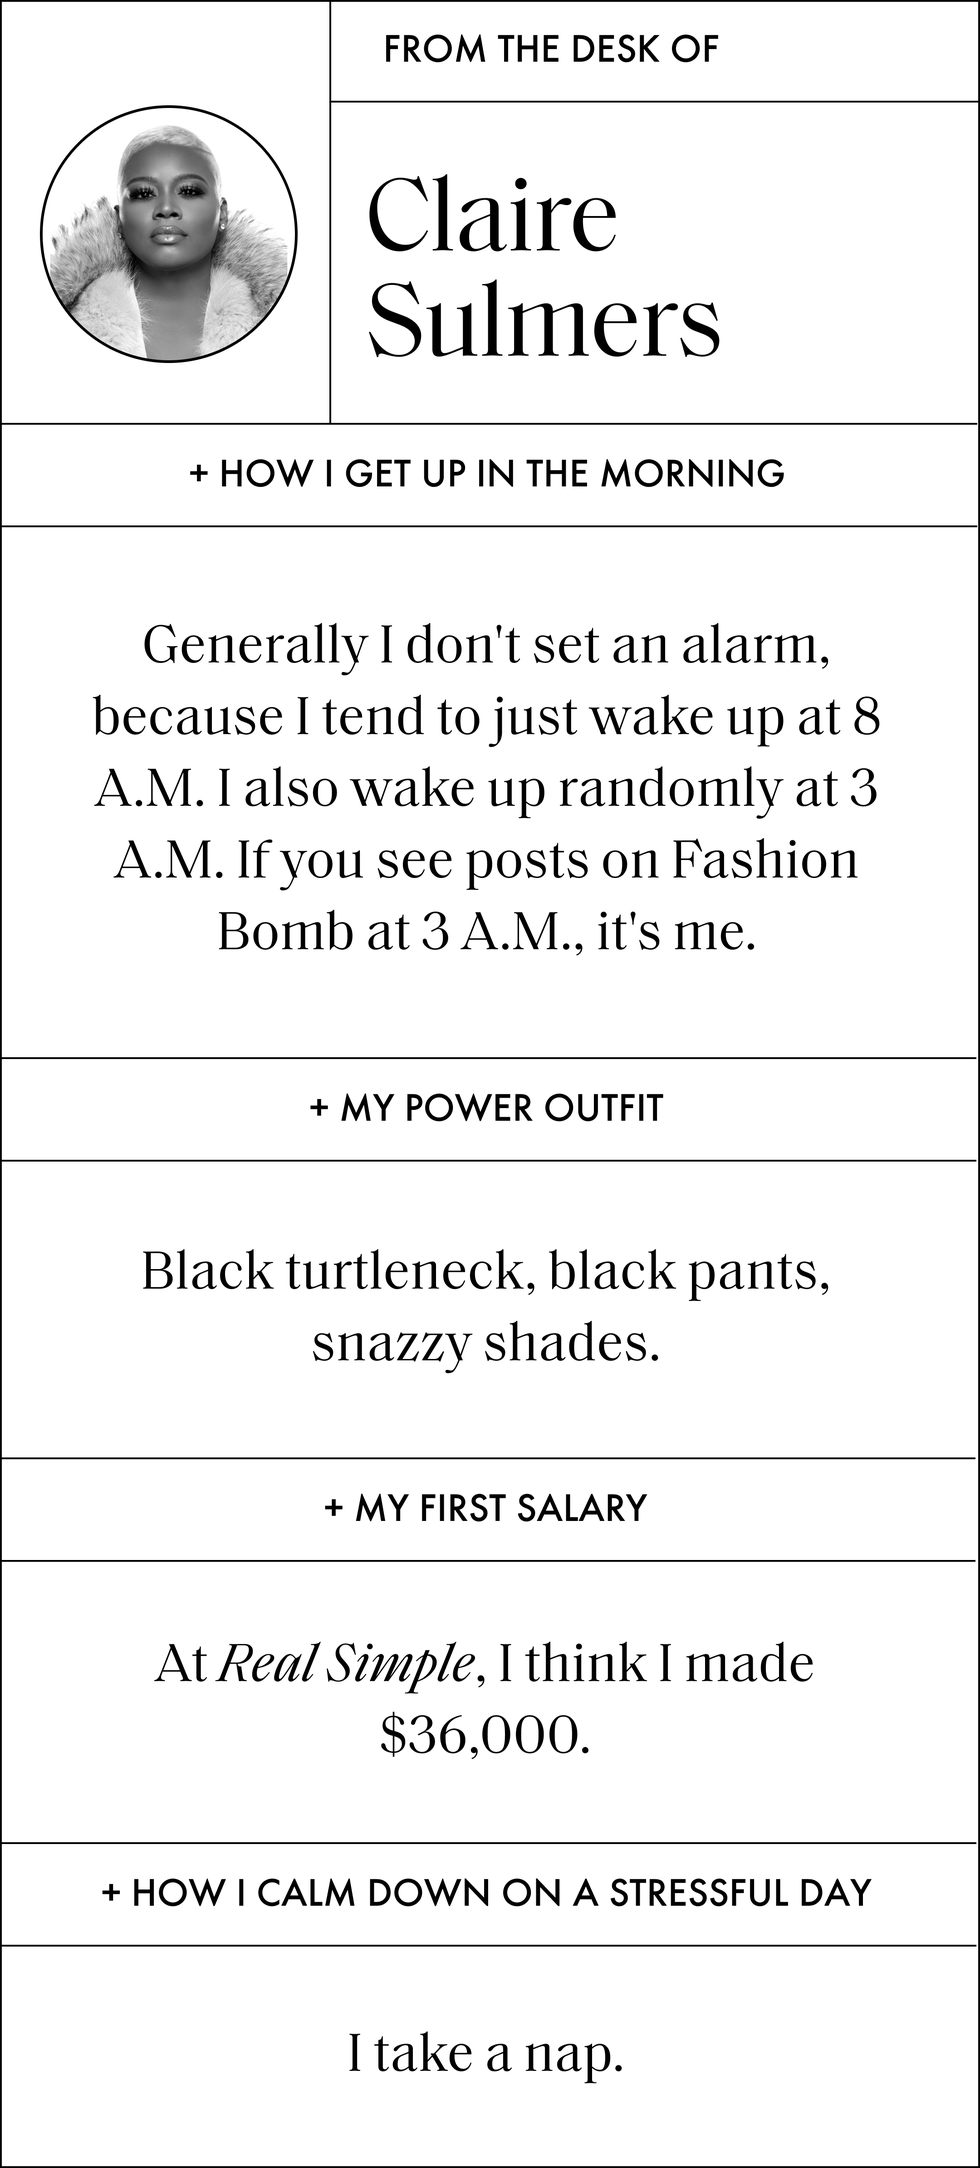 from the desk of claire sulmers how i get up in the morning generally i don't set an alarm, because i tend to just wake up at 8 am i also wake up randomly at 3 am if you see posts on fashion bomb at 3 am, it's me my power outfit black turtleneck, black pants, snazzy shades my first salary at real simple, i think i made 36,000 dollars how i calm down on a stressful day i take a nap